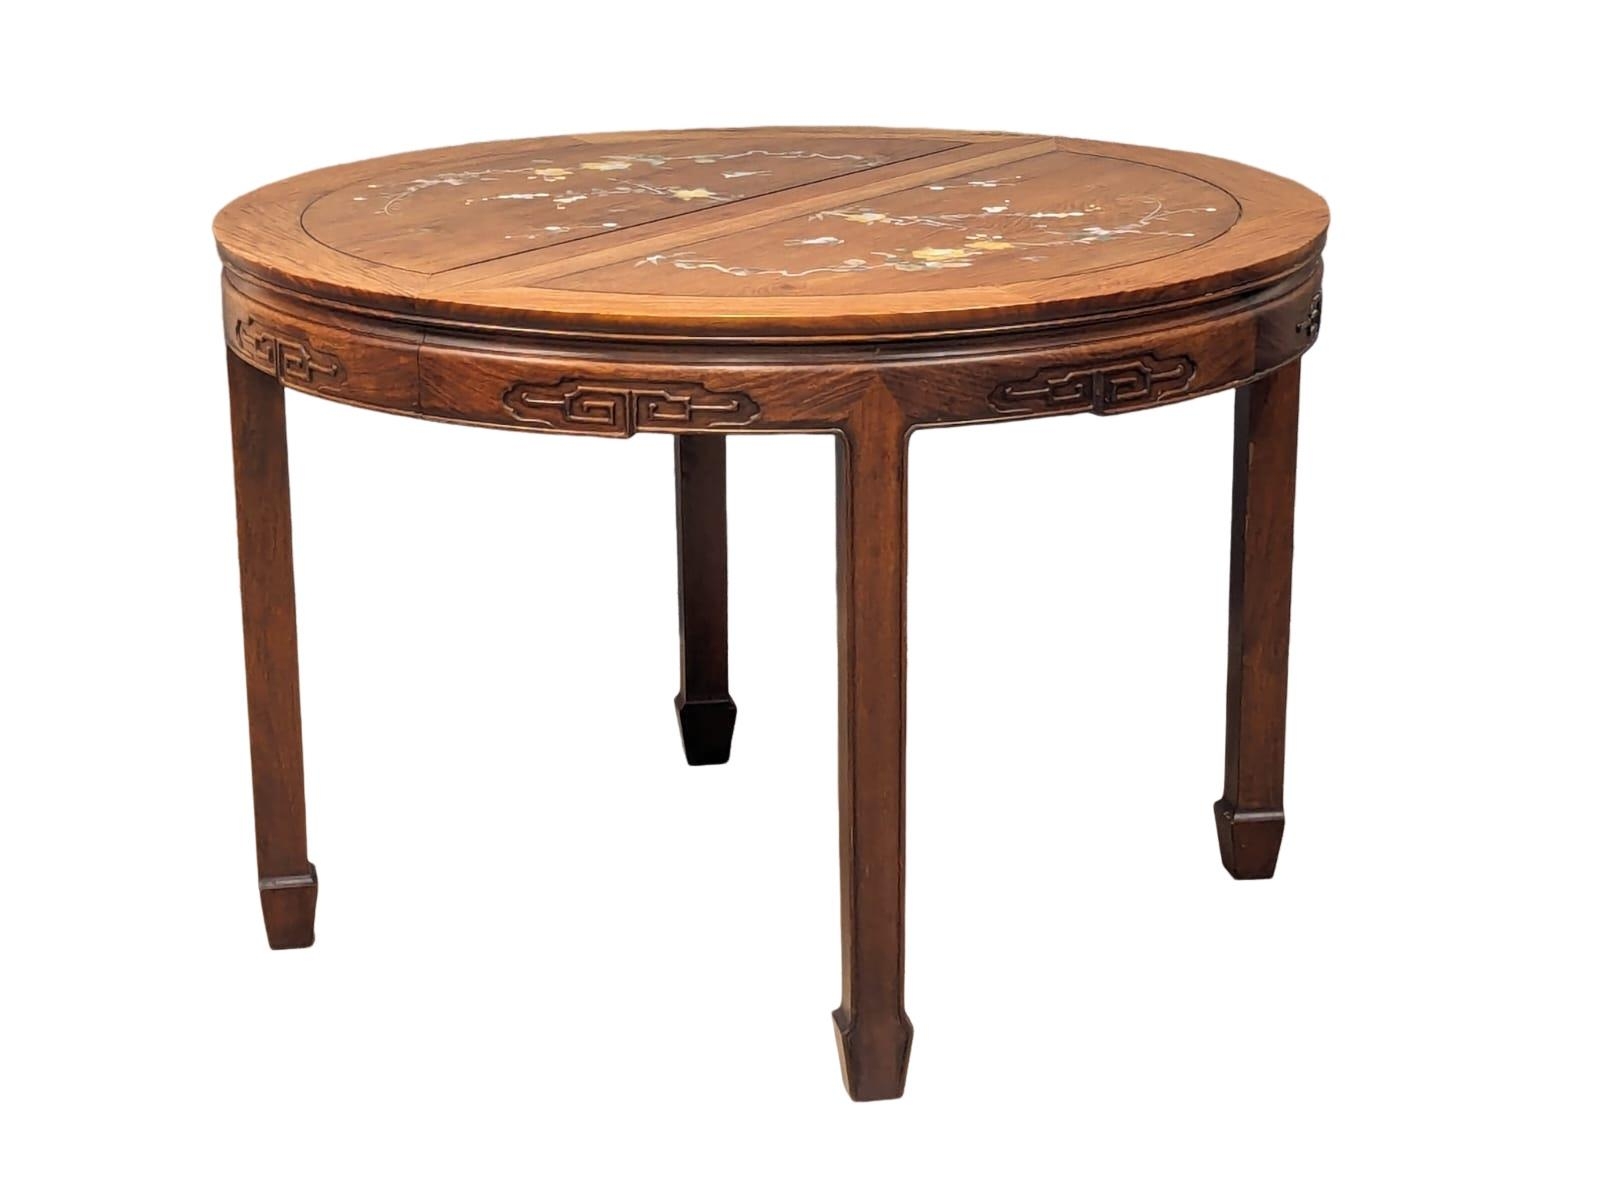 A Chinese rosewood 2 leaf extending dining table and 6 chairs with Mother of Pearl inlay. - Image 4 of 11